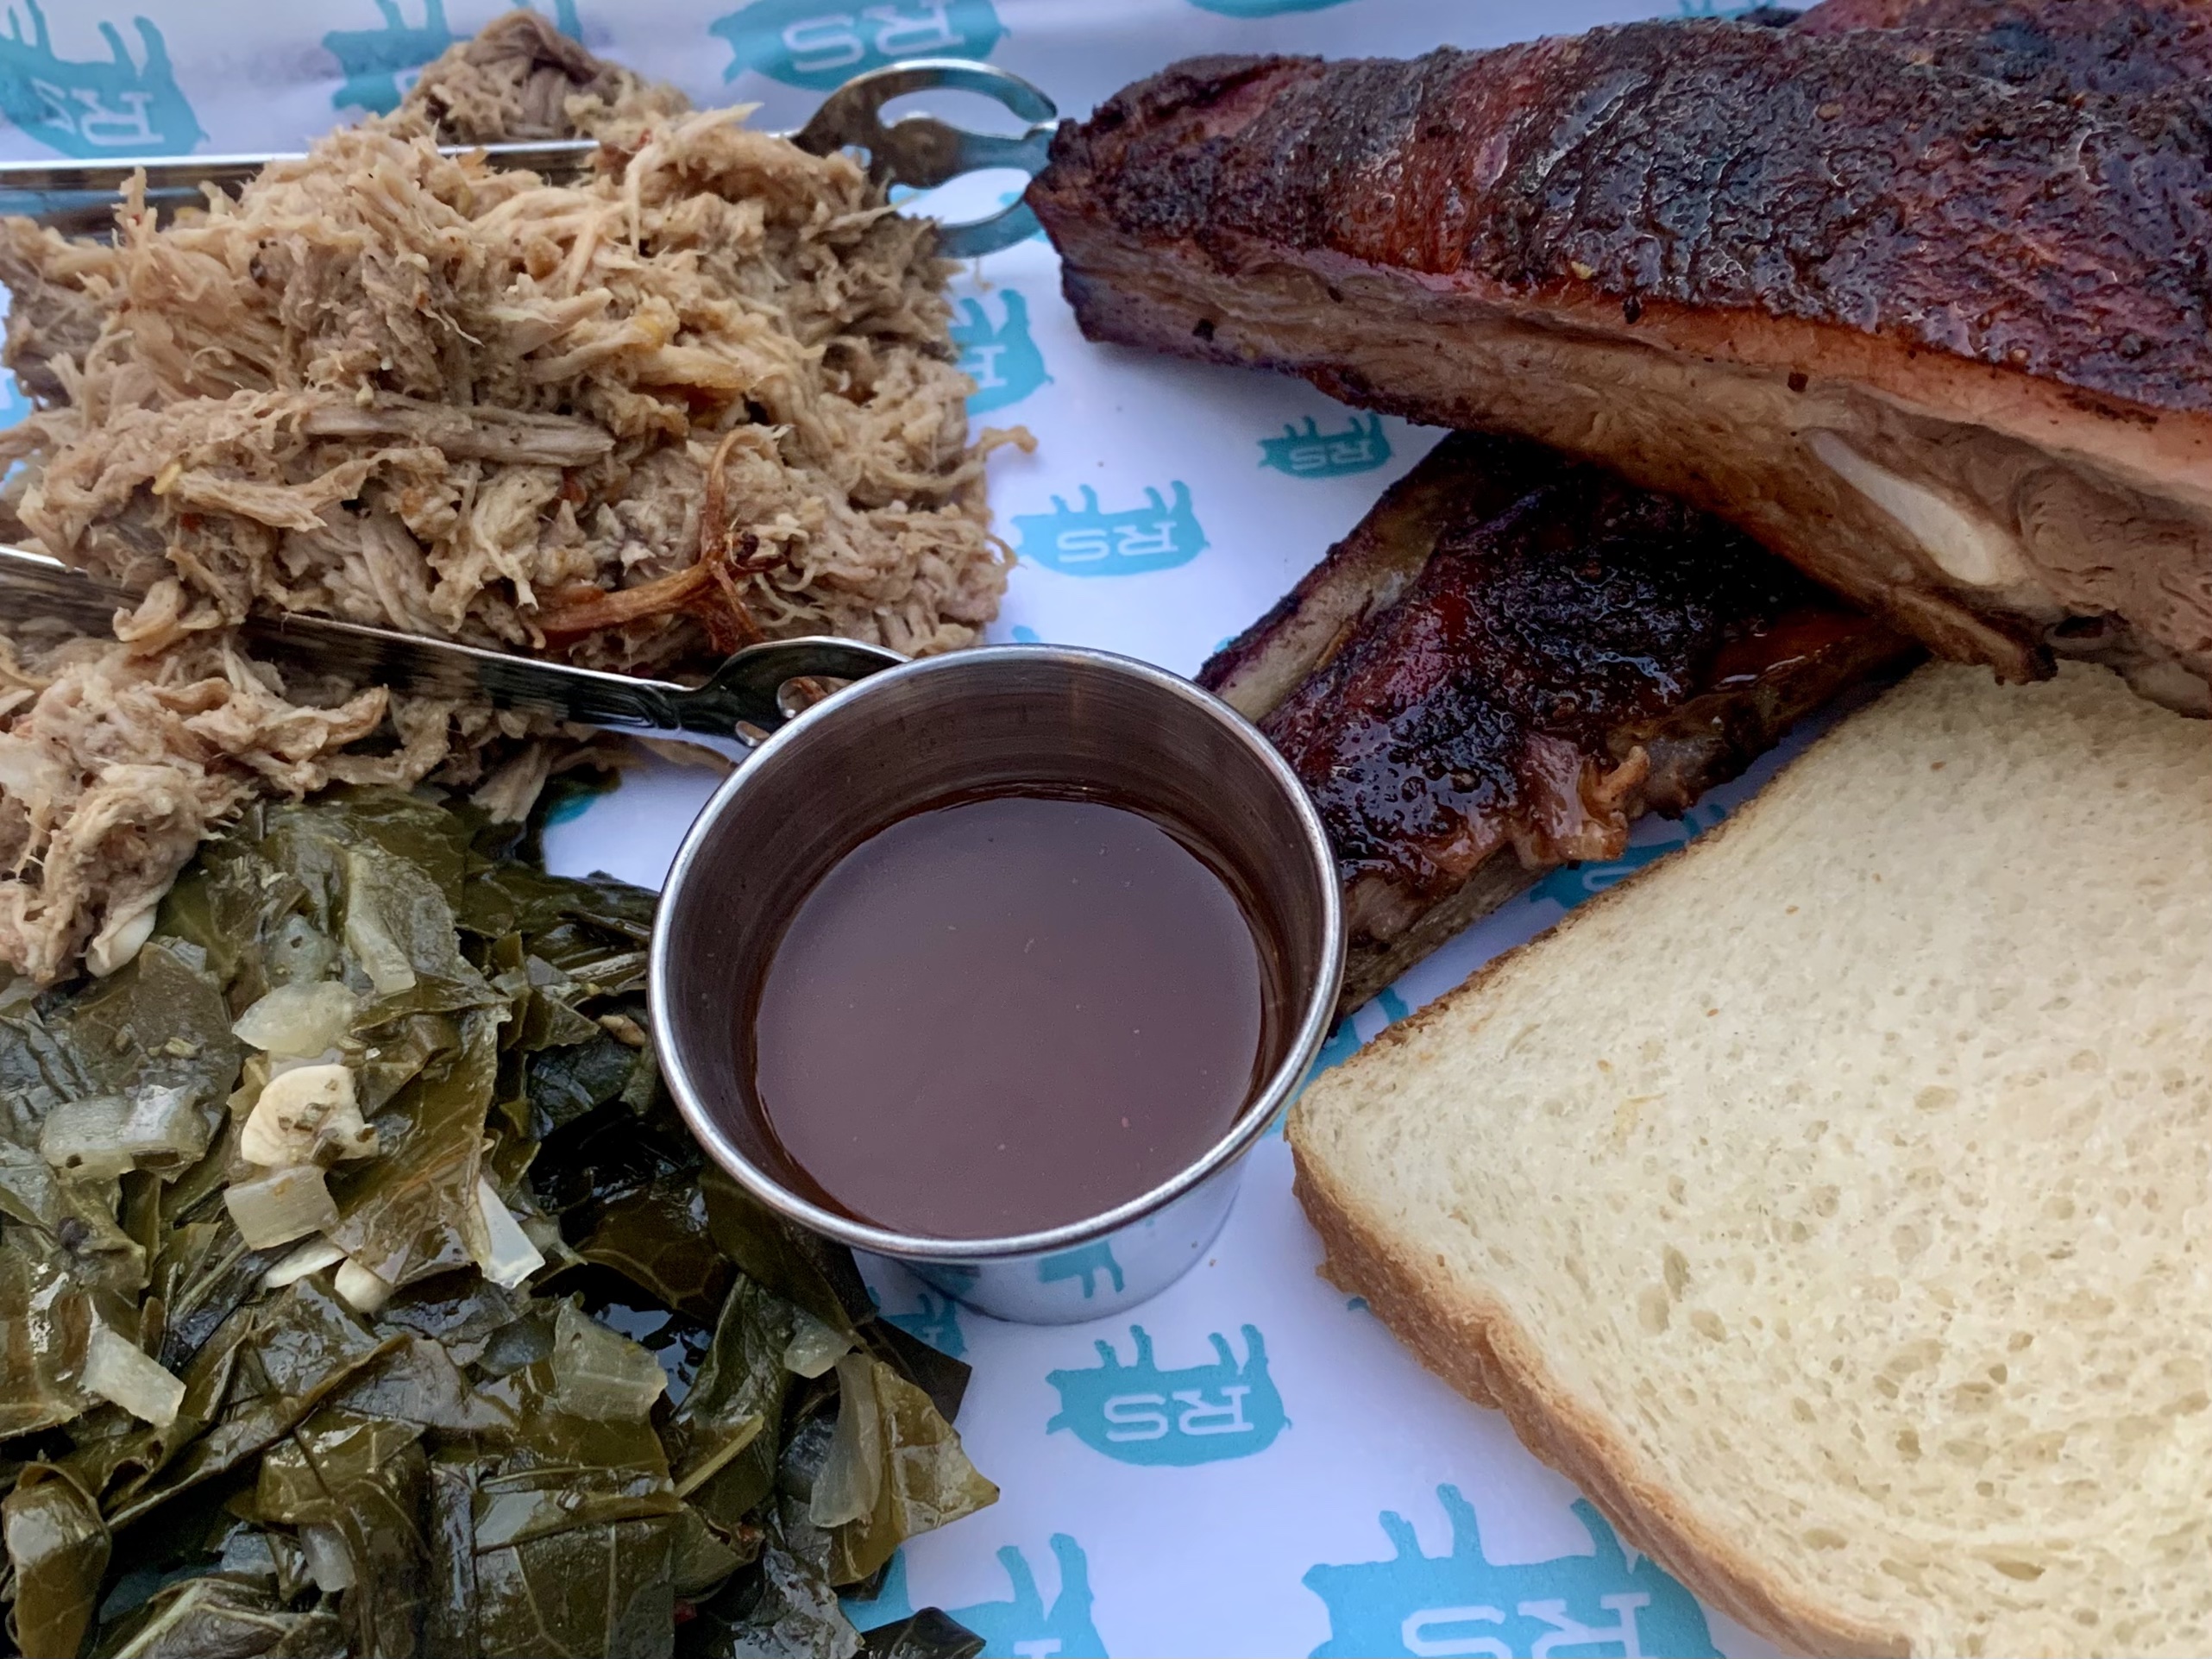 Pulled pork, ribs, collard greens and white bread